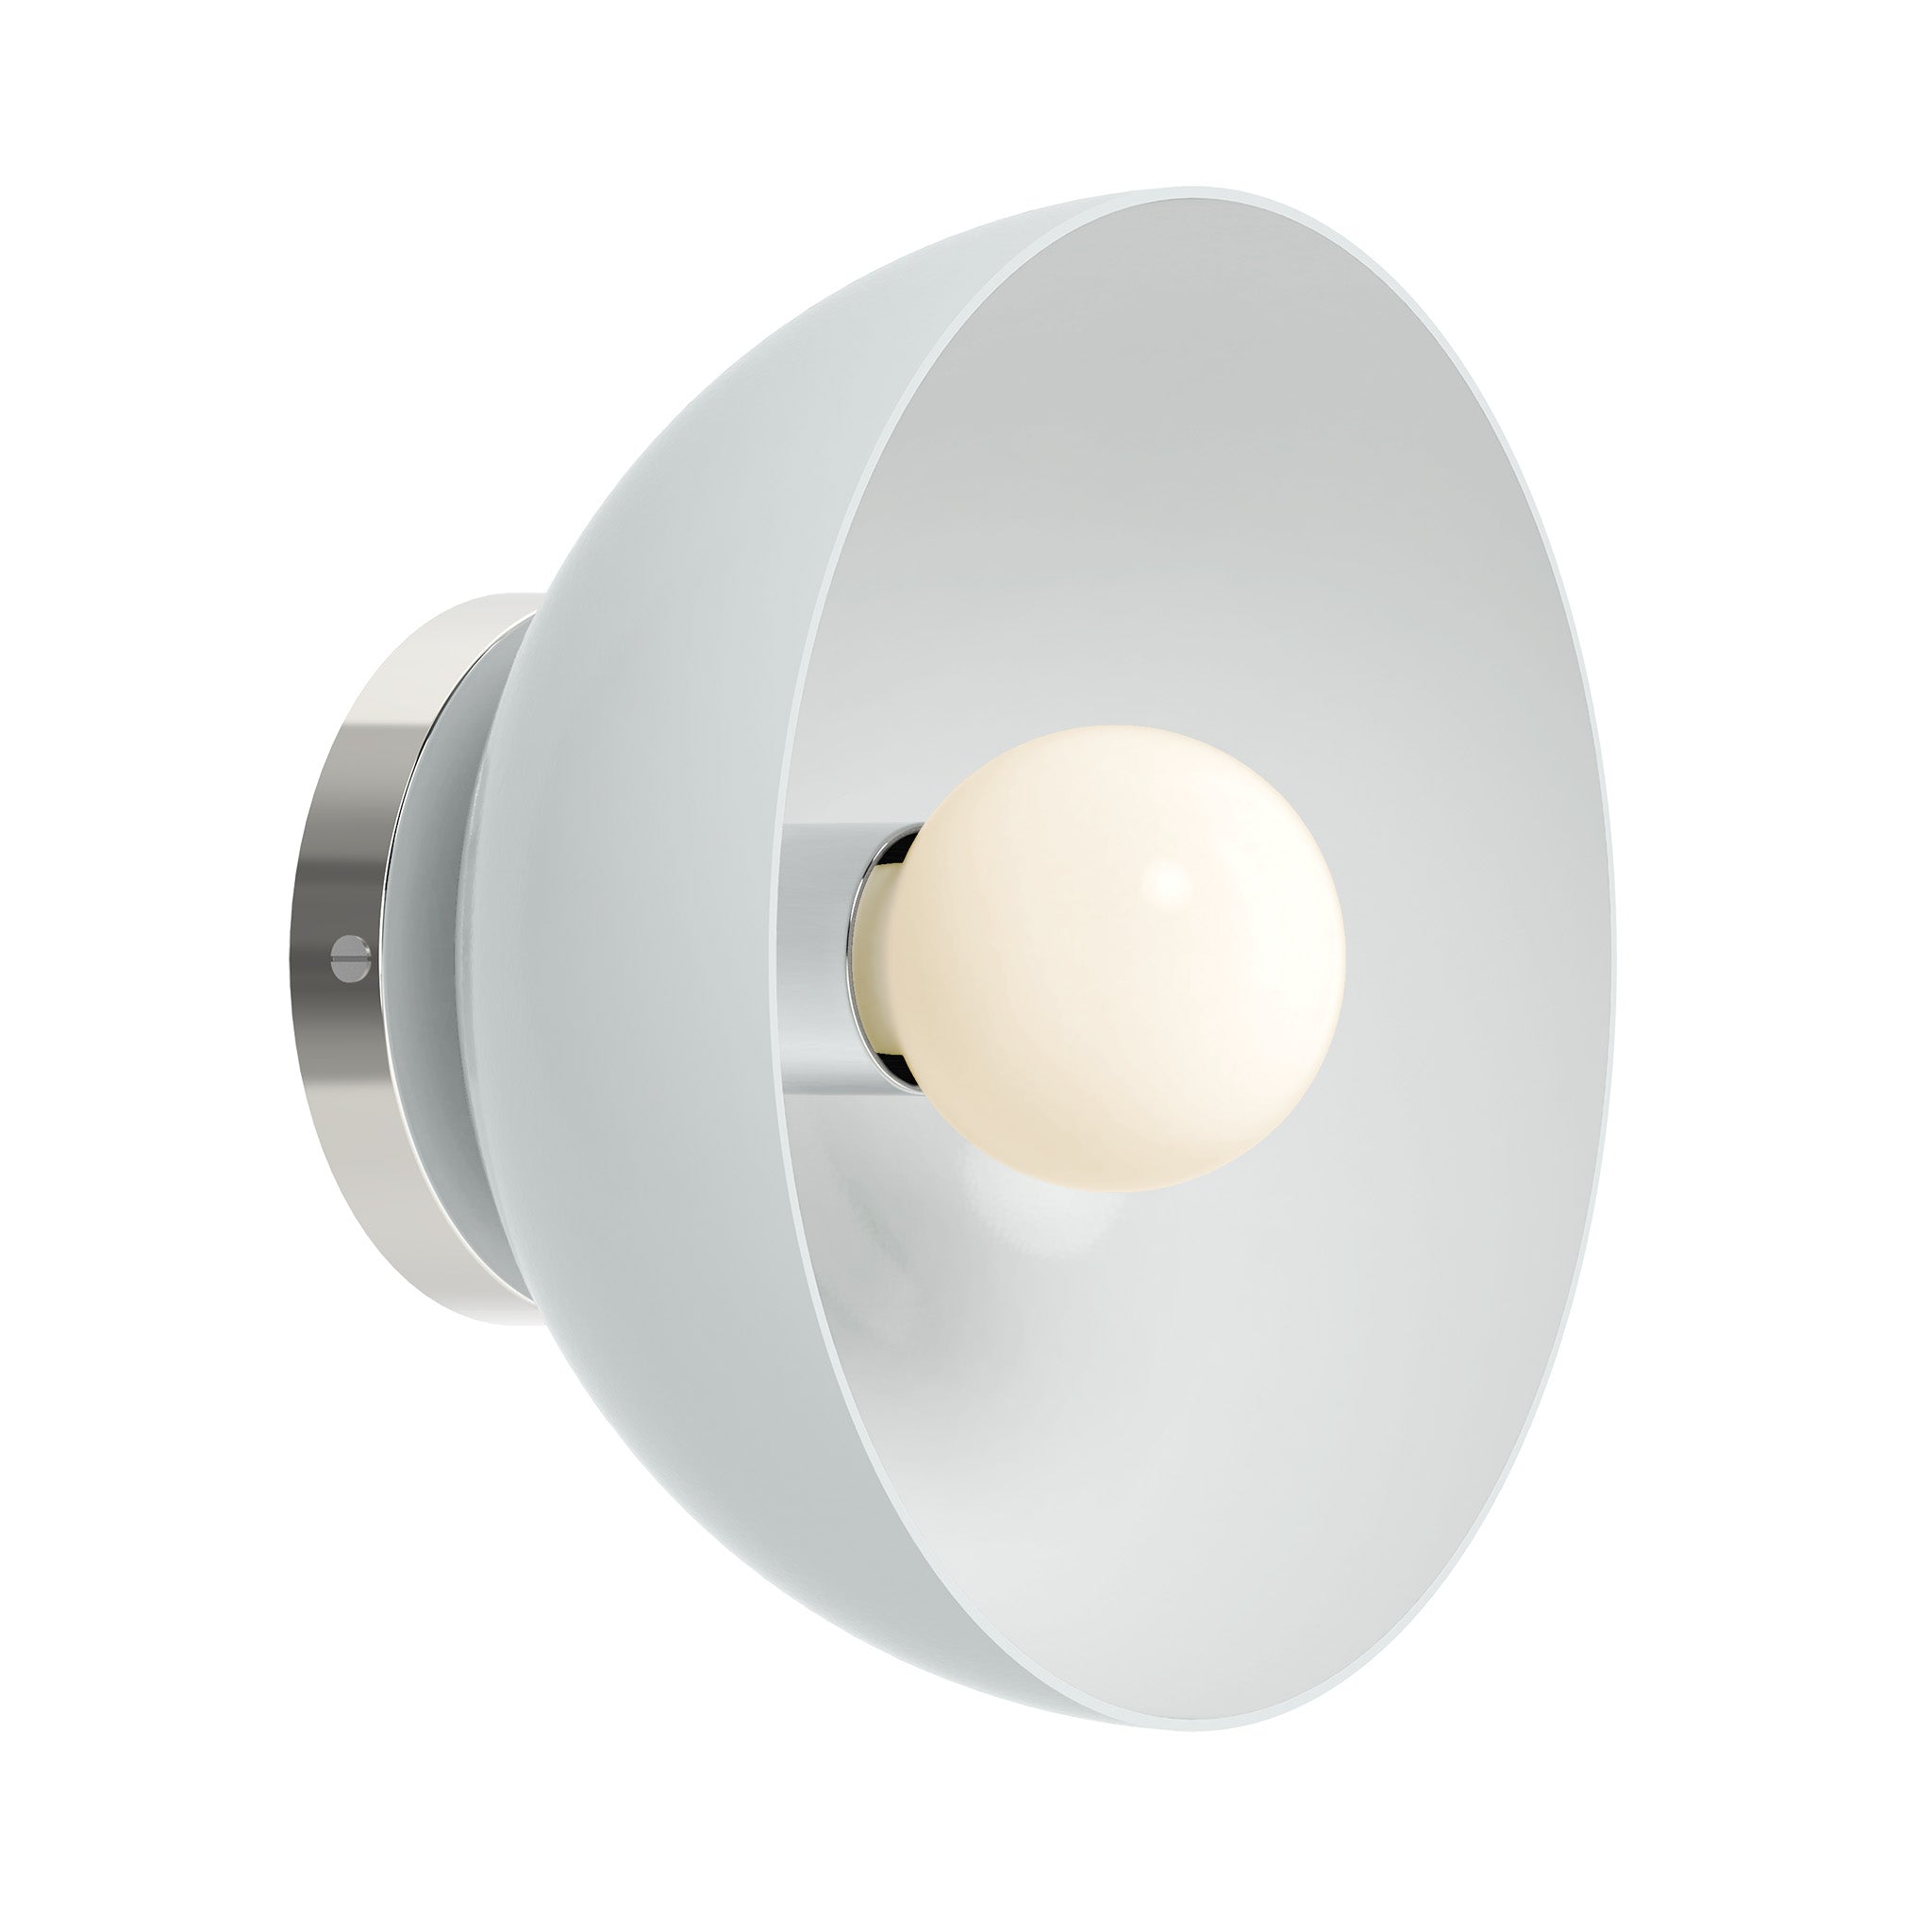 Nickel and spa color hemi dome sconce 10" Dutton Brown lighting